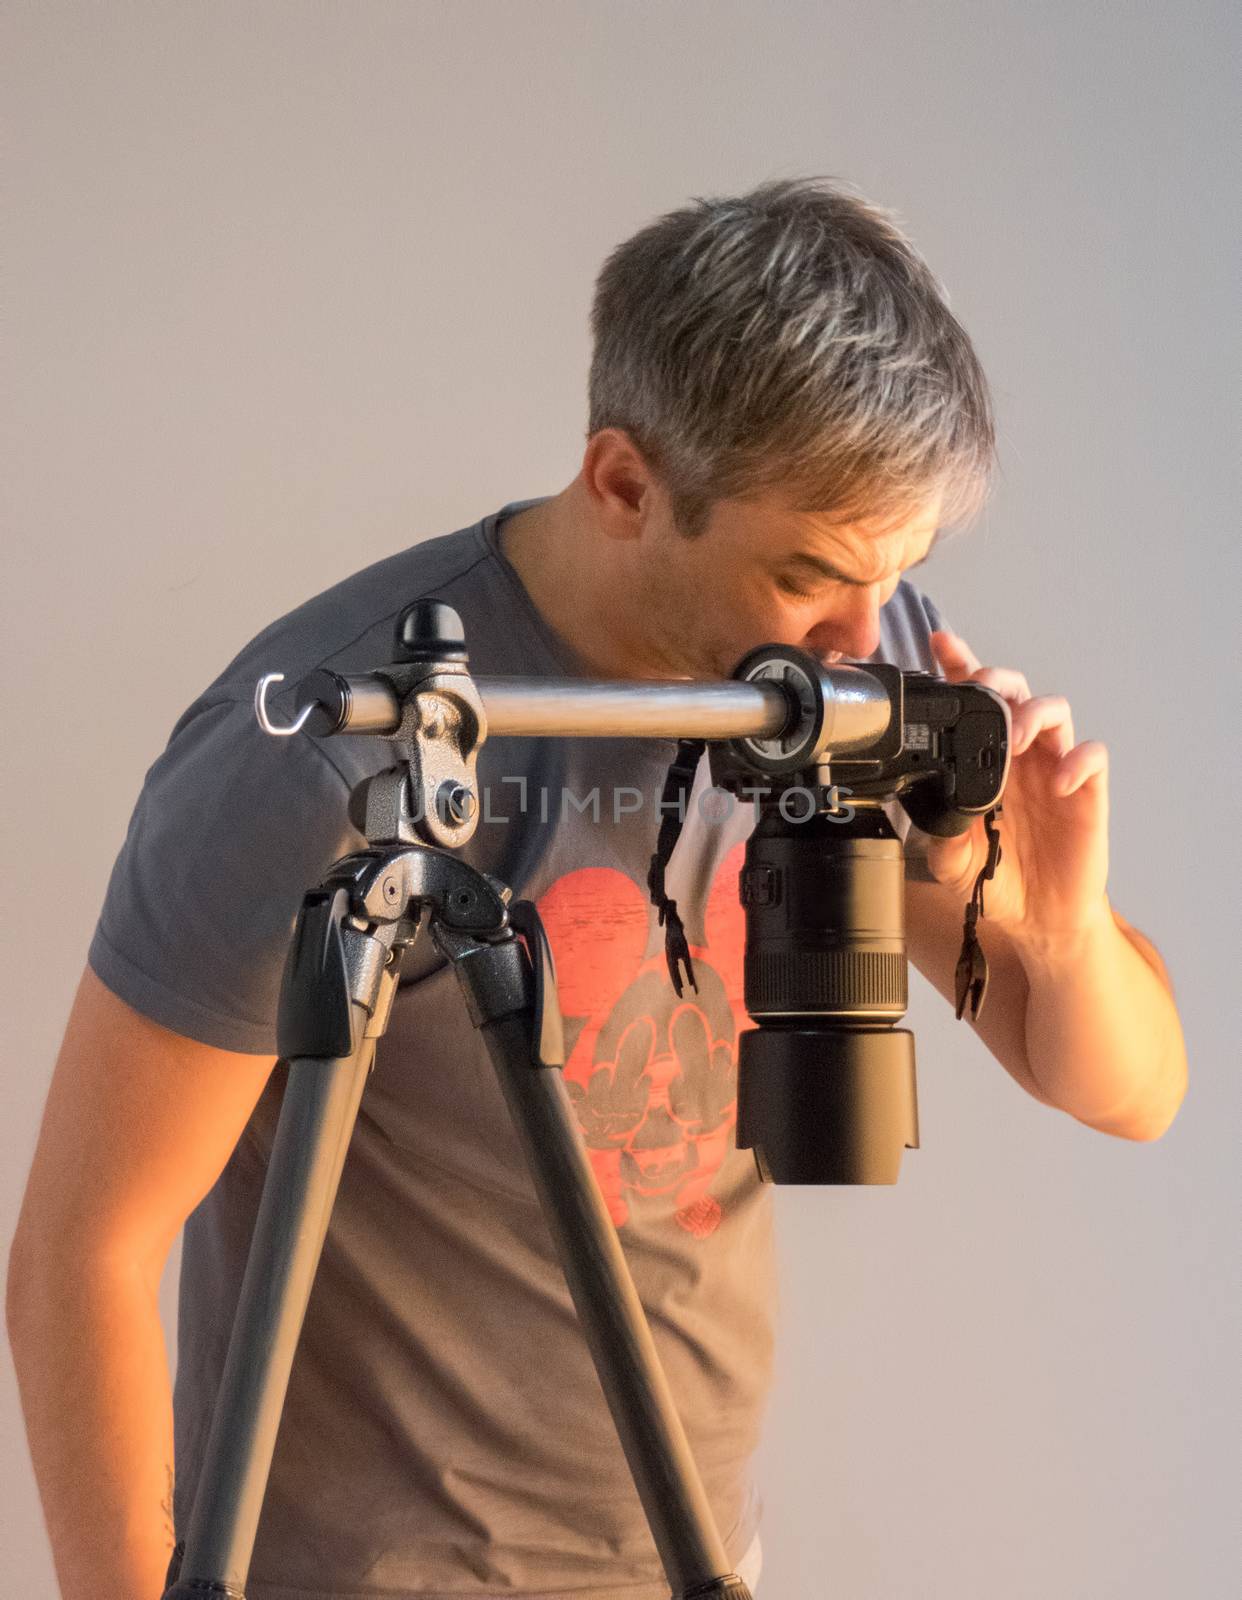 photographer in studio looking at camera. unintended photography